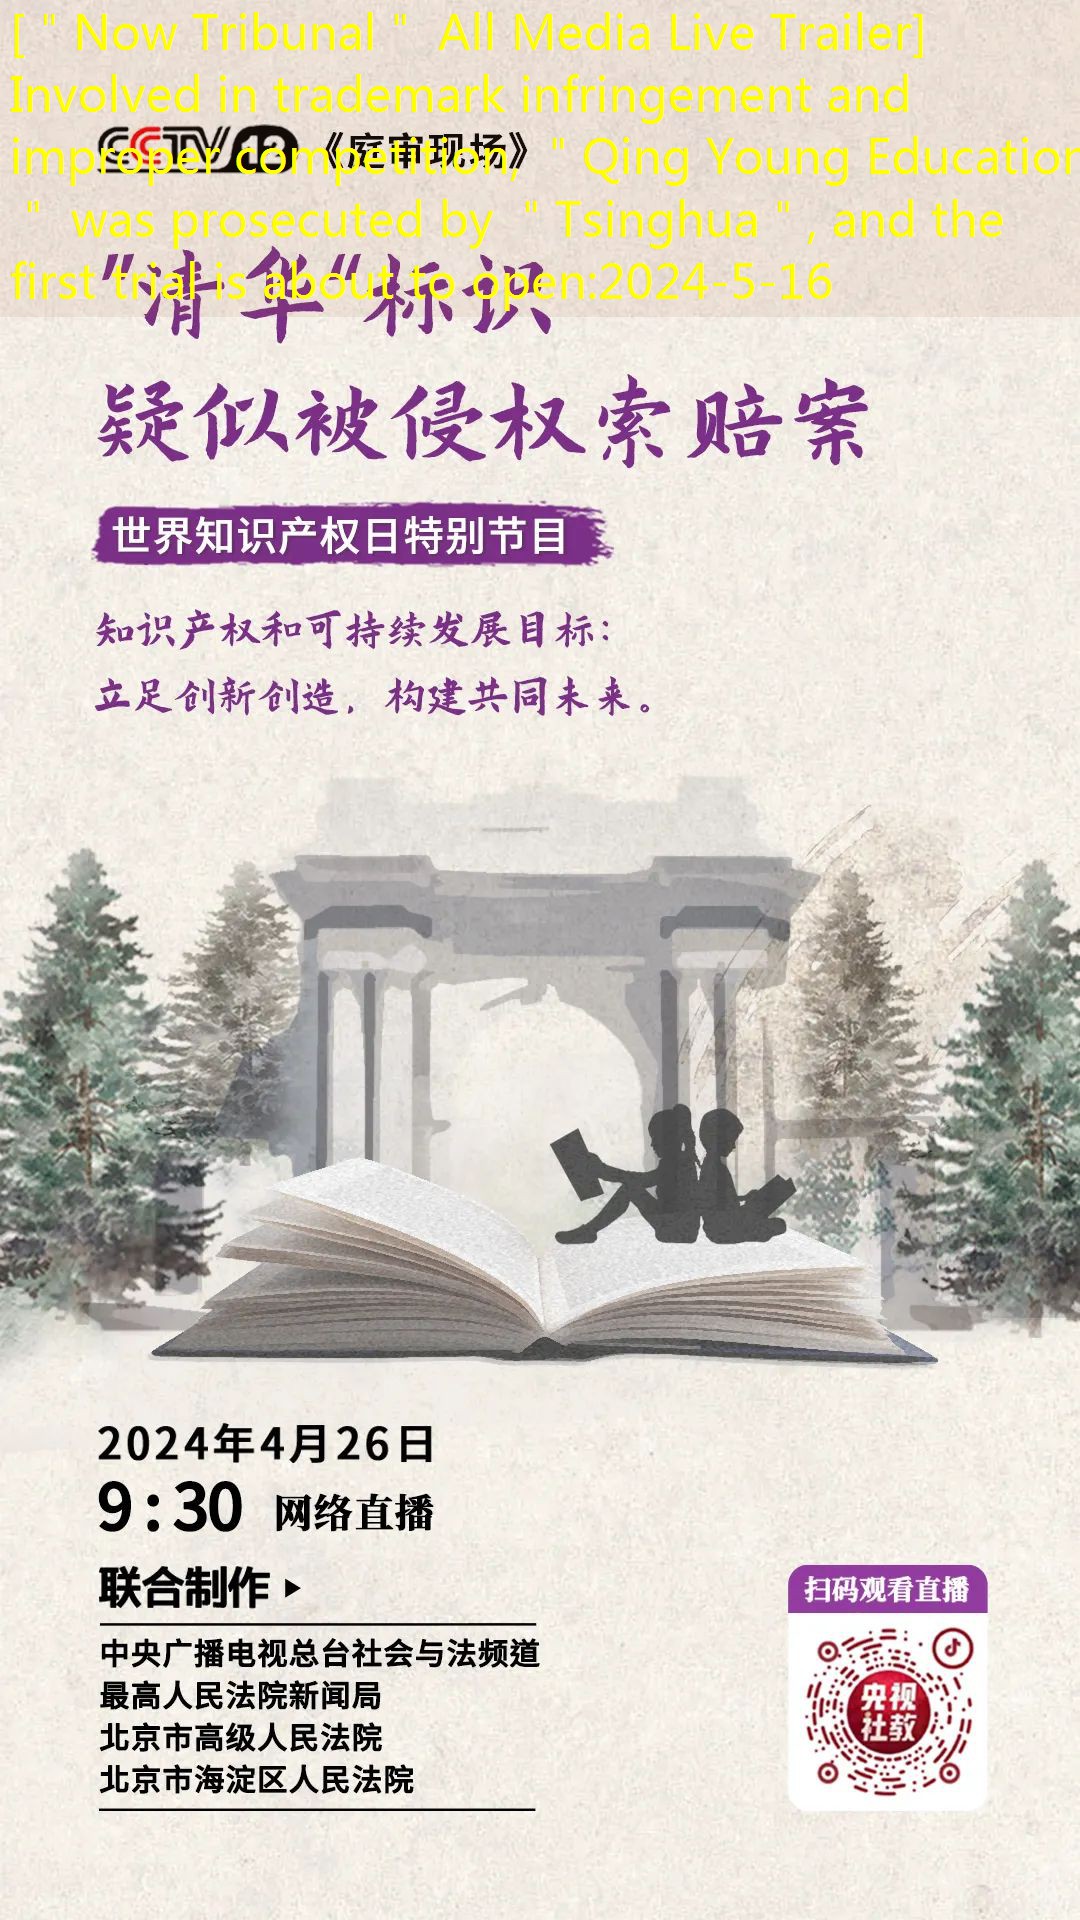 [＂Now Tribunal＂ All Media Live Trailer] Involved in trademark infringement and improper competition, ＂Qing Young Education＂ was prosecuted by ＂Tsinghua＂, and the first trial is about to open